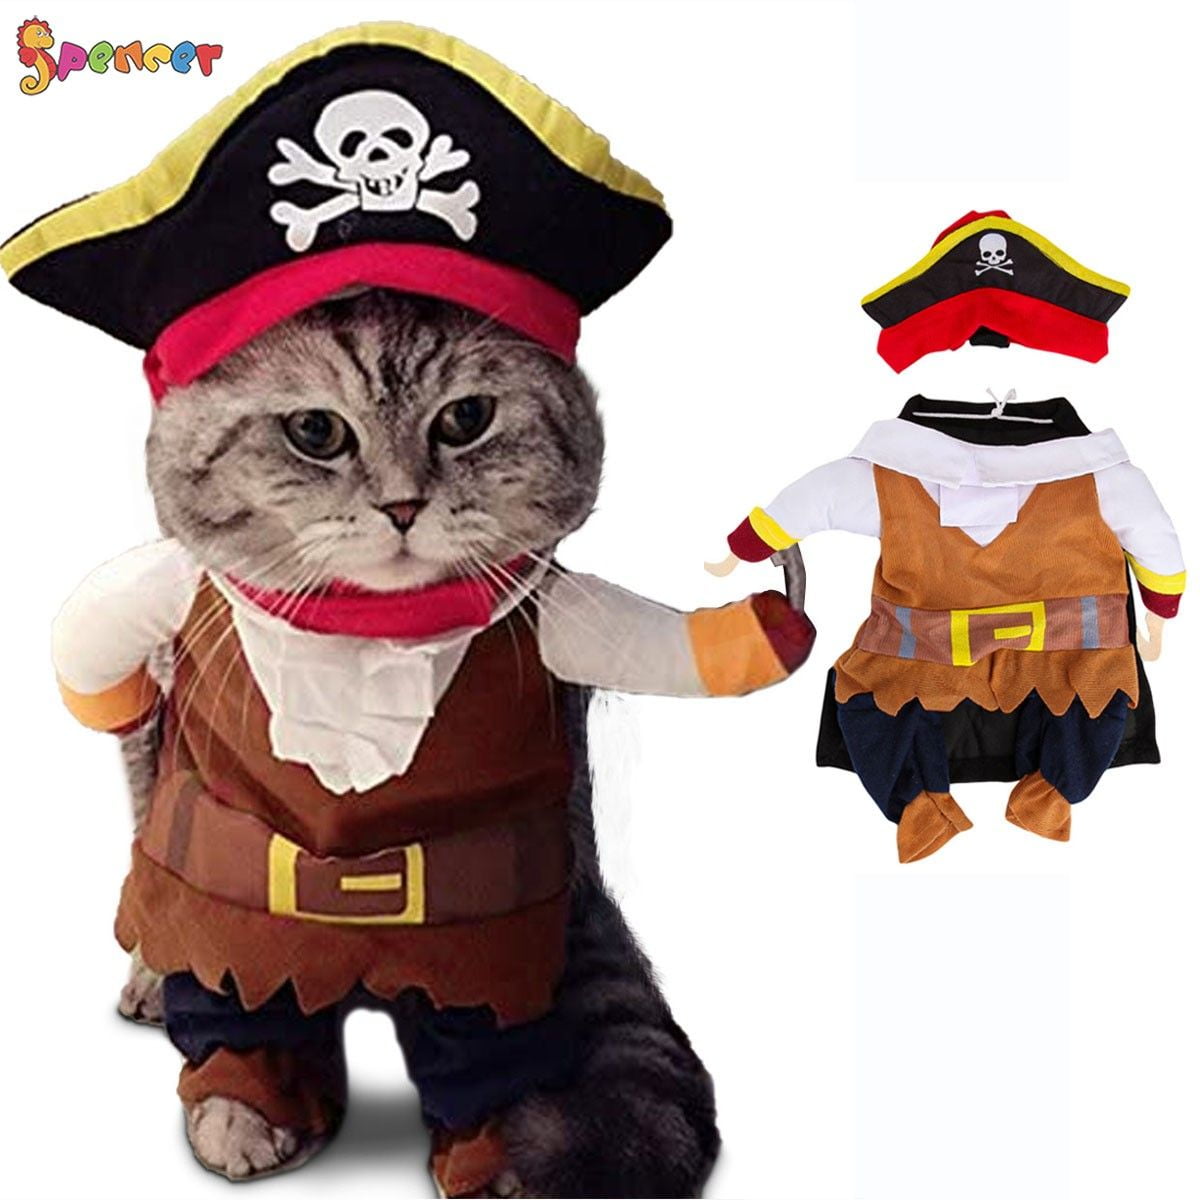 Spencer Funny Pirate Dog Cat Halloween Costume Outfit Pet Clothes Corsair Dressing Up Party Apparel Jumpsuit Plus Hat For Small Medium Large Dogs Cats Size L Walmart Com